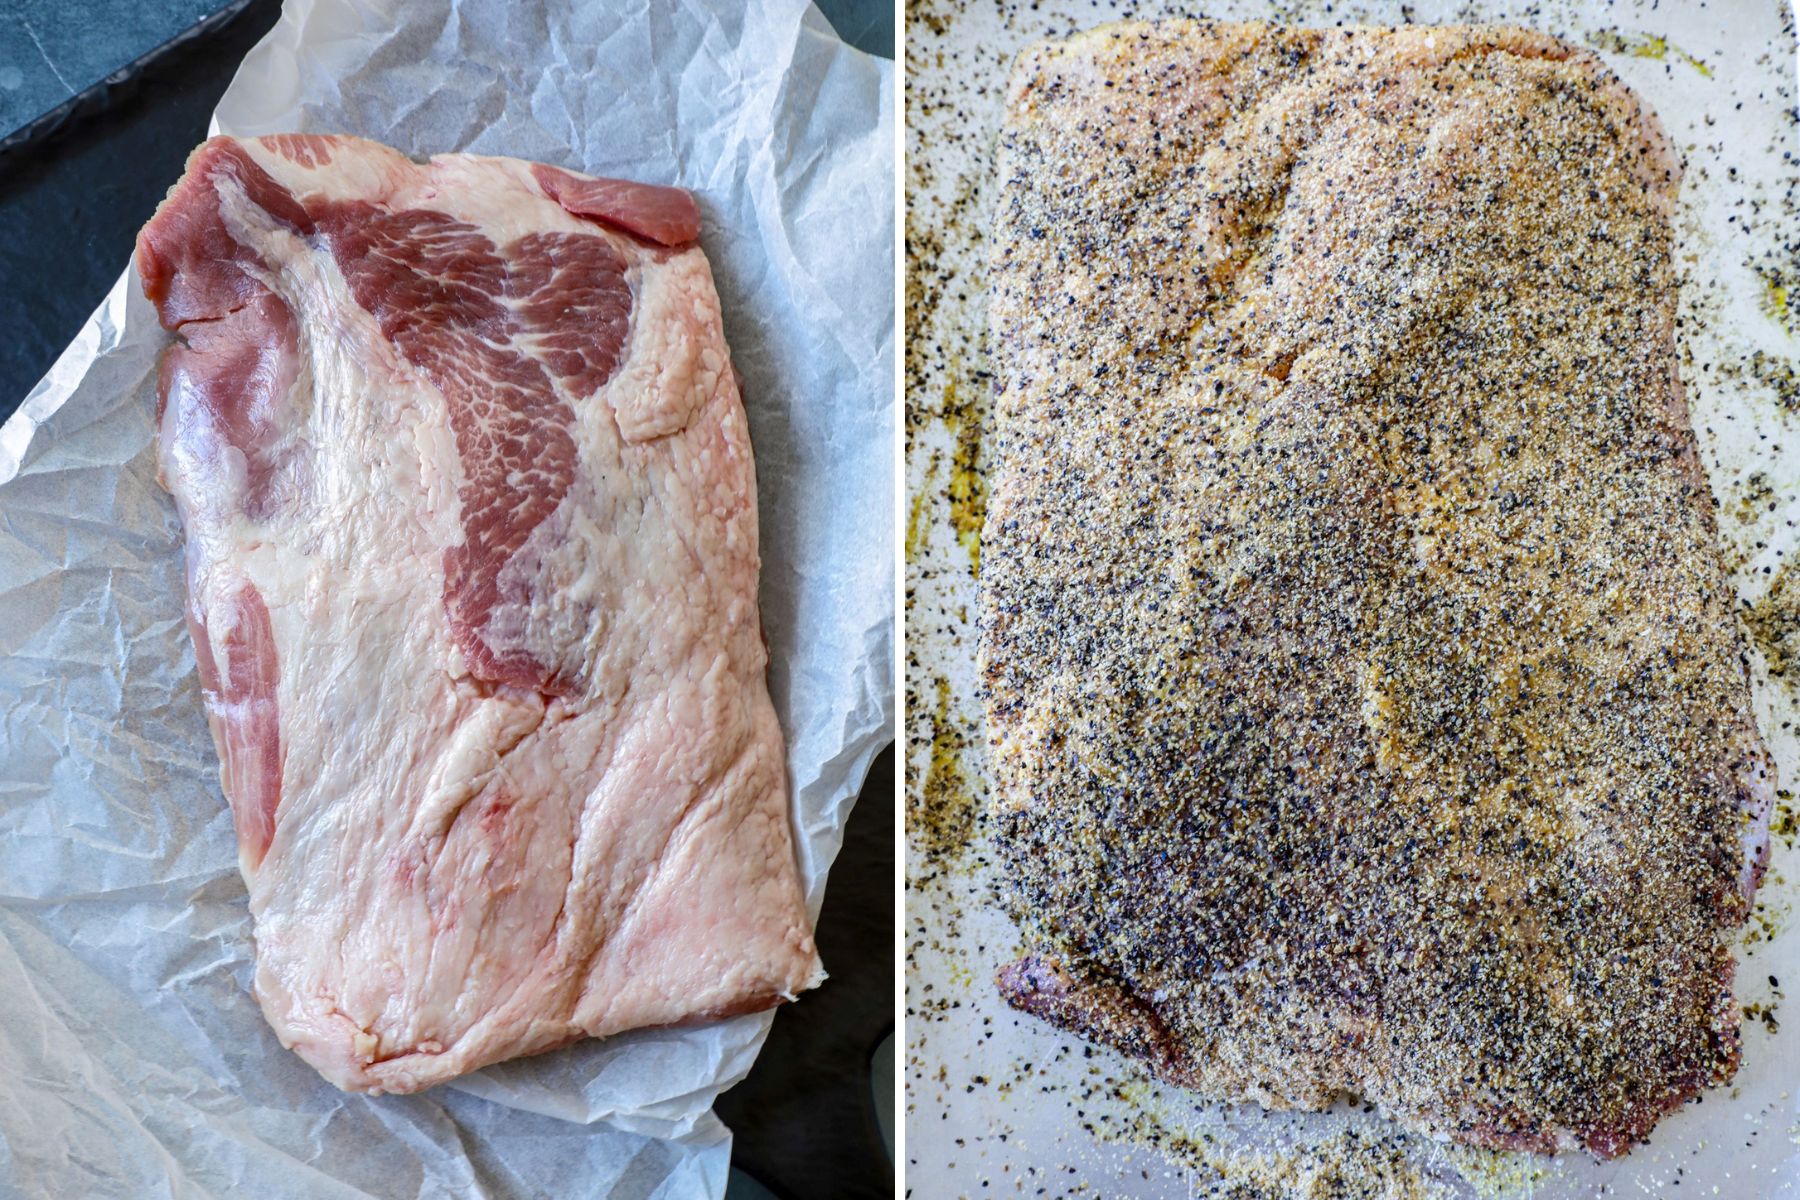 https://www.bonappeteach.com/wp-content/uploads/2023/05/How-to-prepare-a-smoked-pork-brisket-for-the-grill.jpg